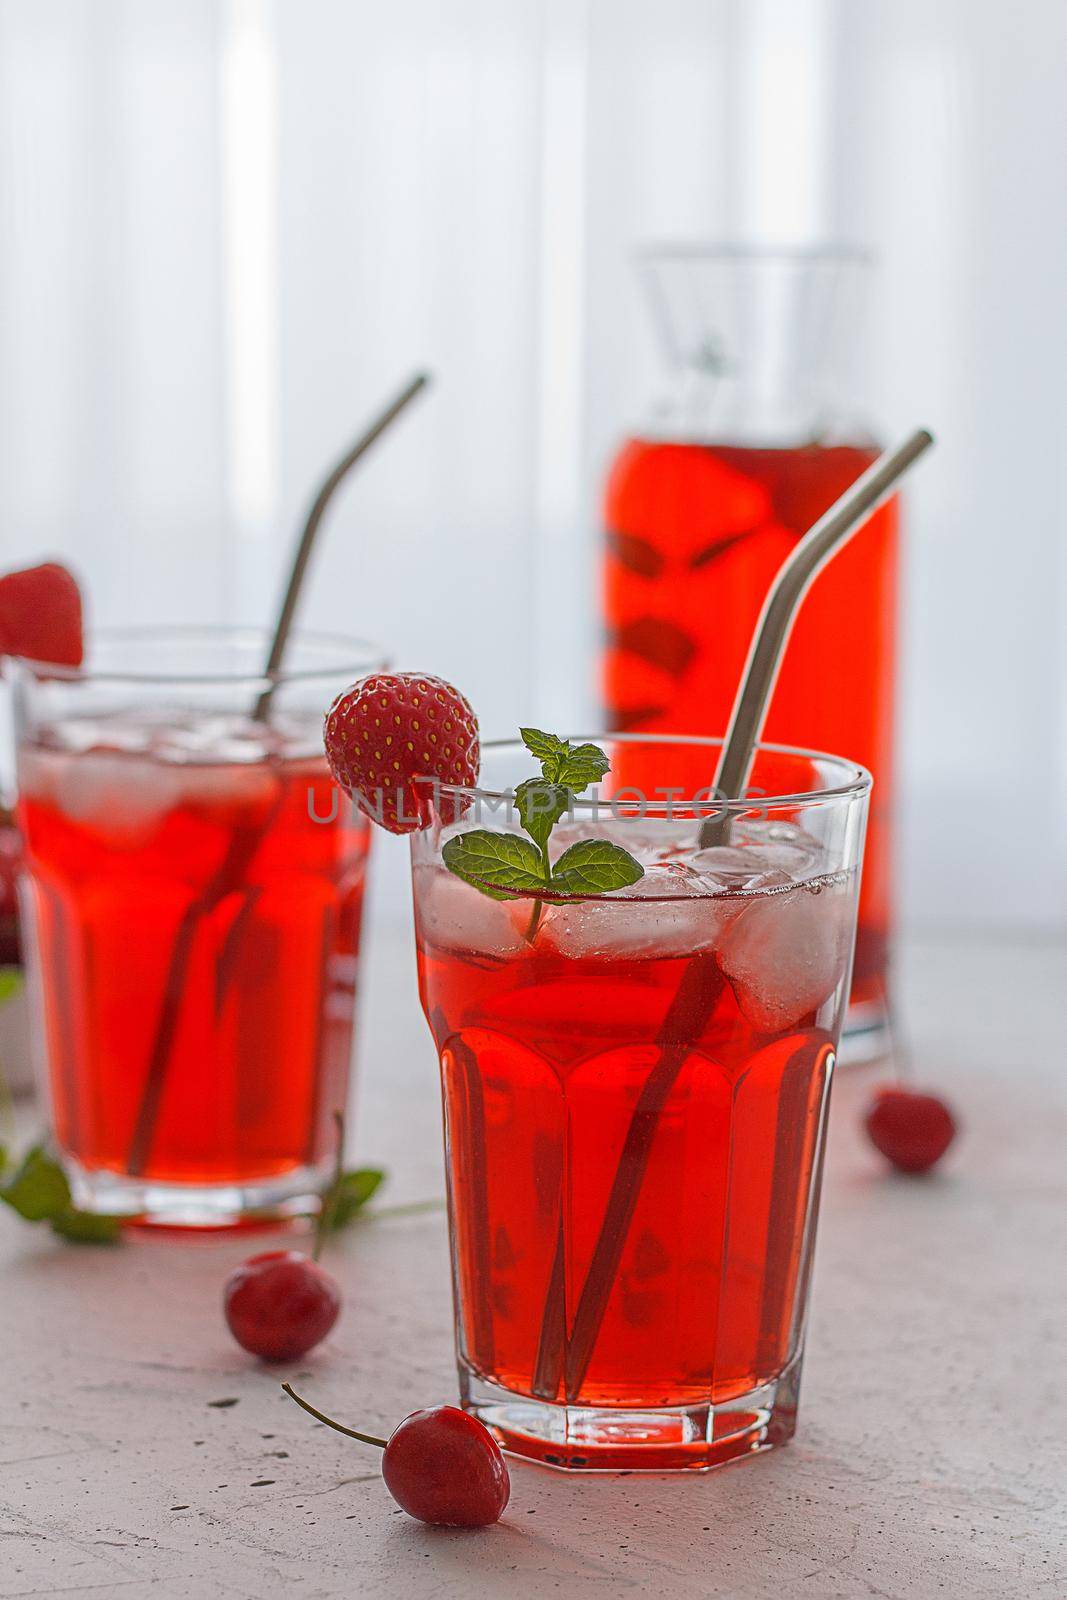 Red refreshing drink with mint on a gray background. Colorful summer non-alcoholic refreshing drink with ice made from berries. Vertical photo